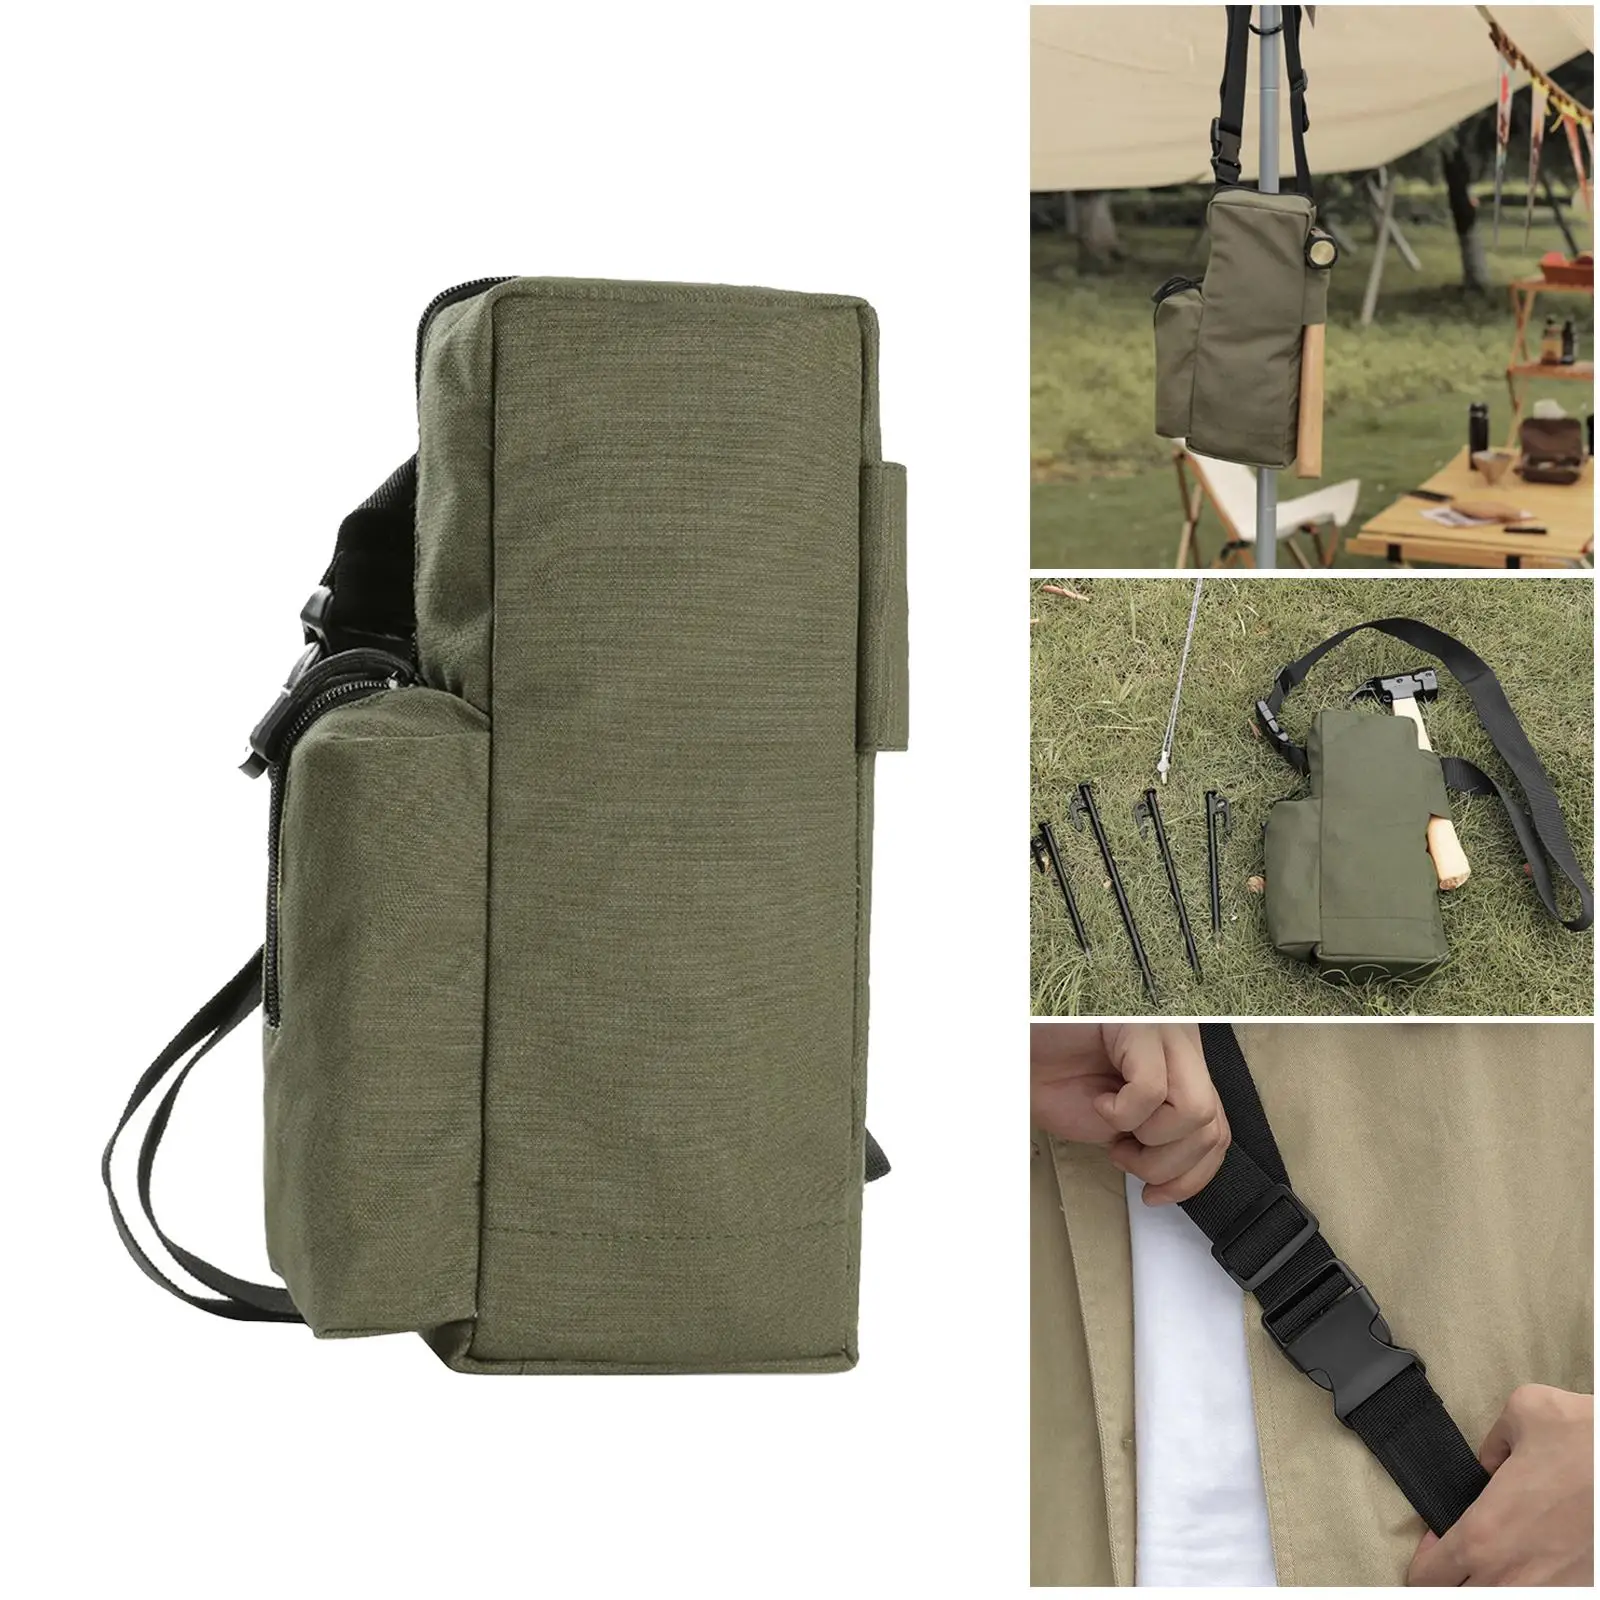 Portable Tent Pegs Storage Bag Tent Stakes Organizer Hammer Pouch Outdoor Fishing Camping Equipment